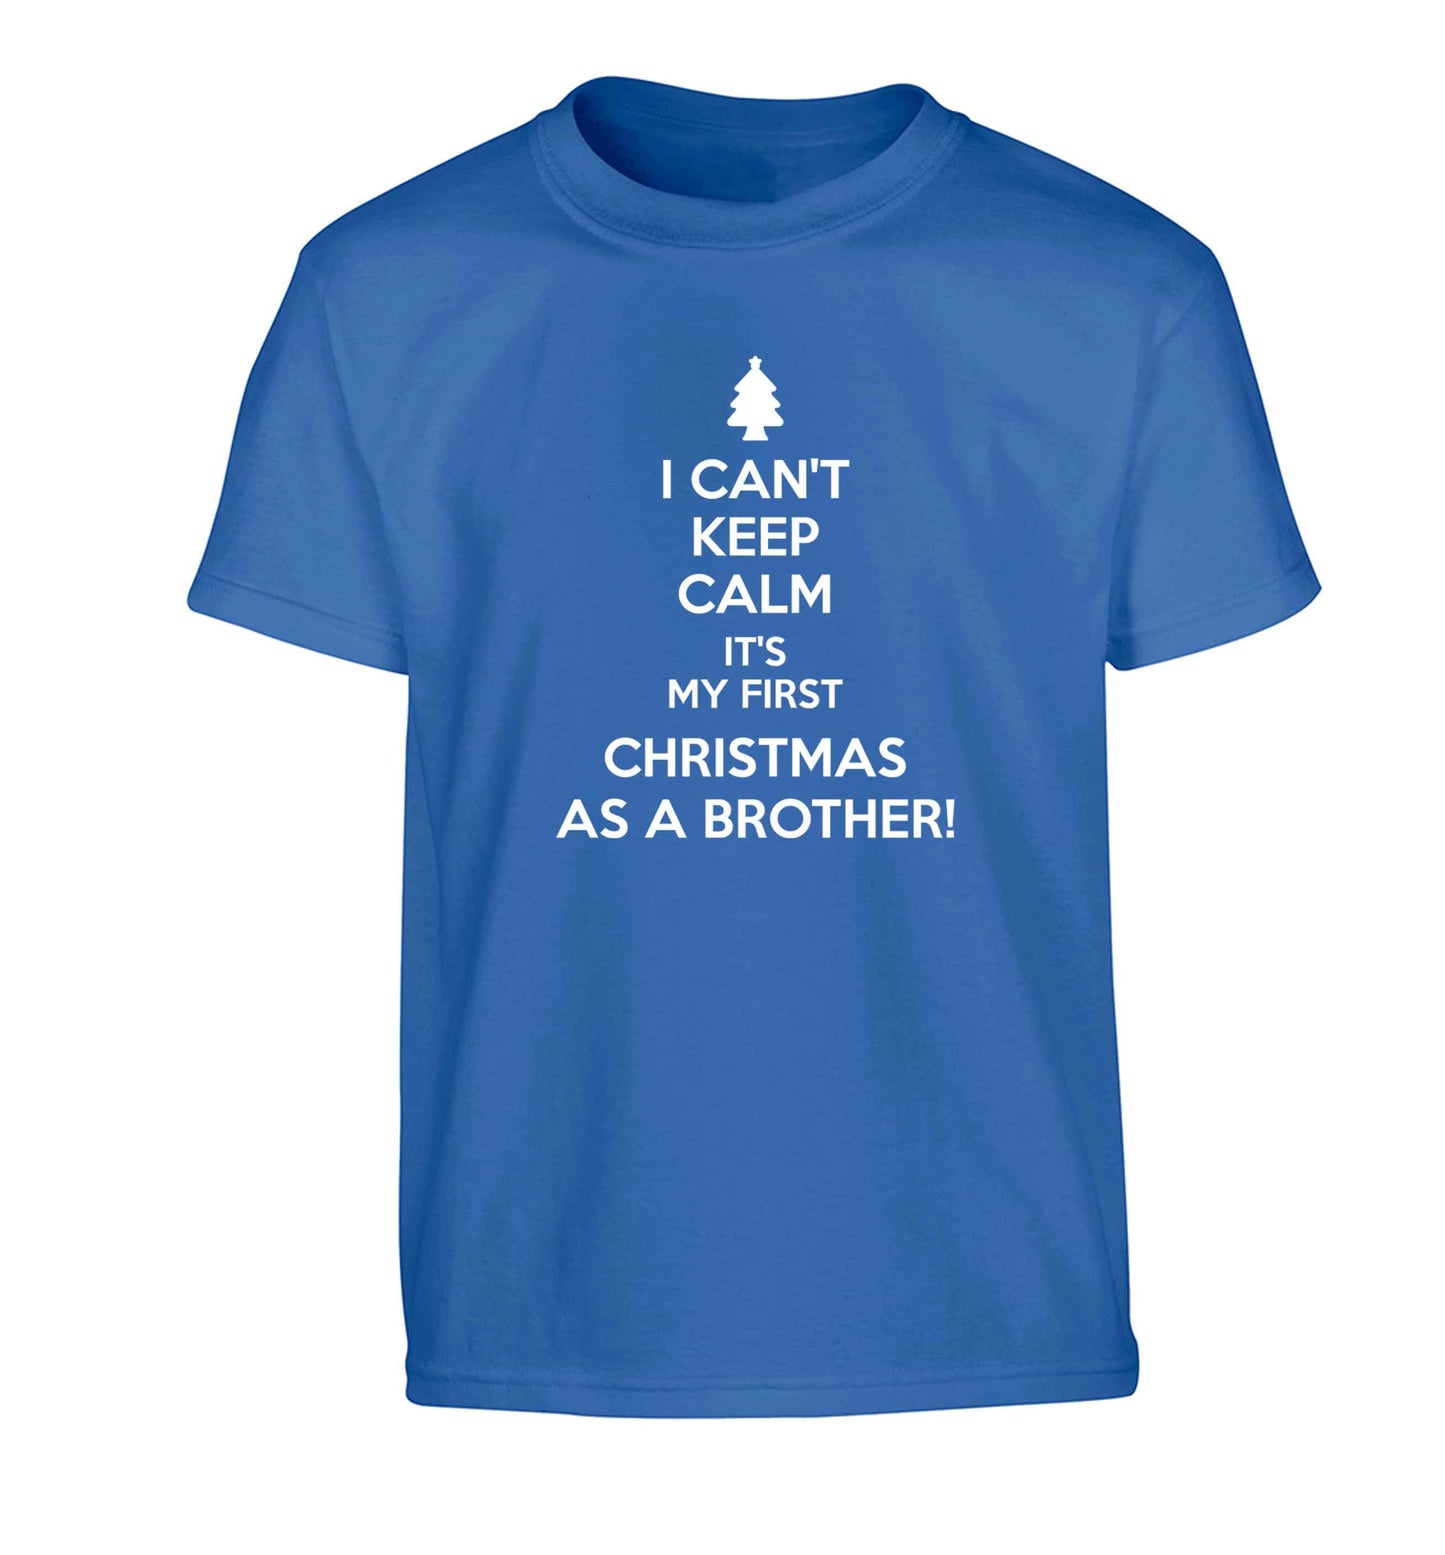 I can't keep calm it's my first Christmas as a brother! Children's blue Tshirt 12-13 Years